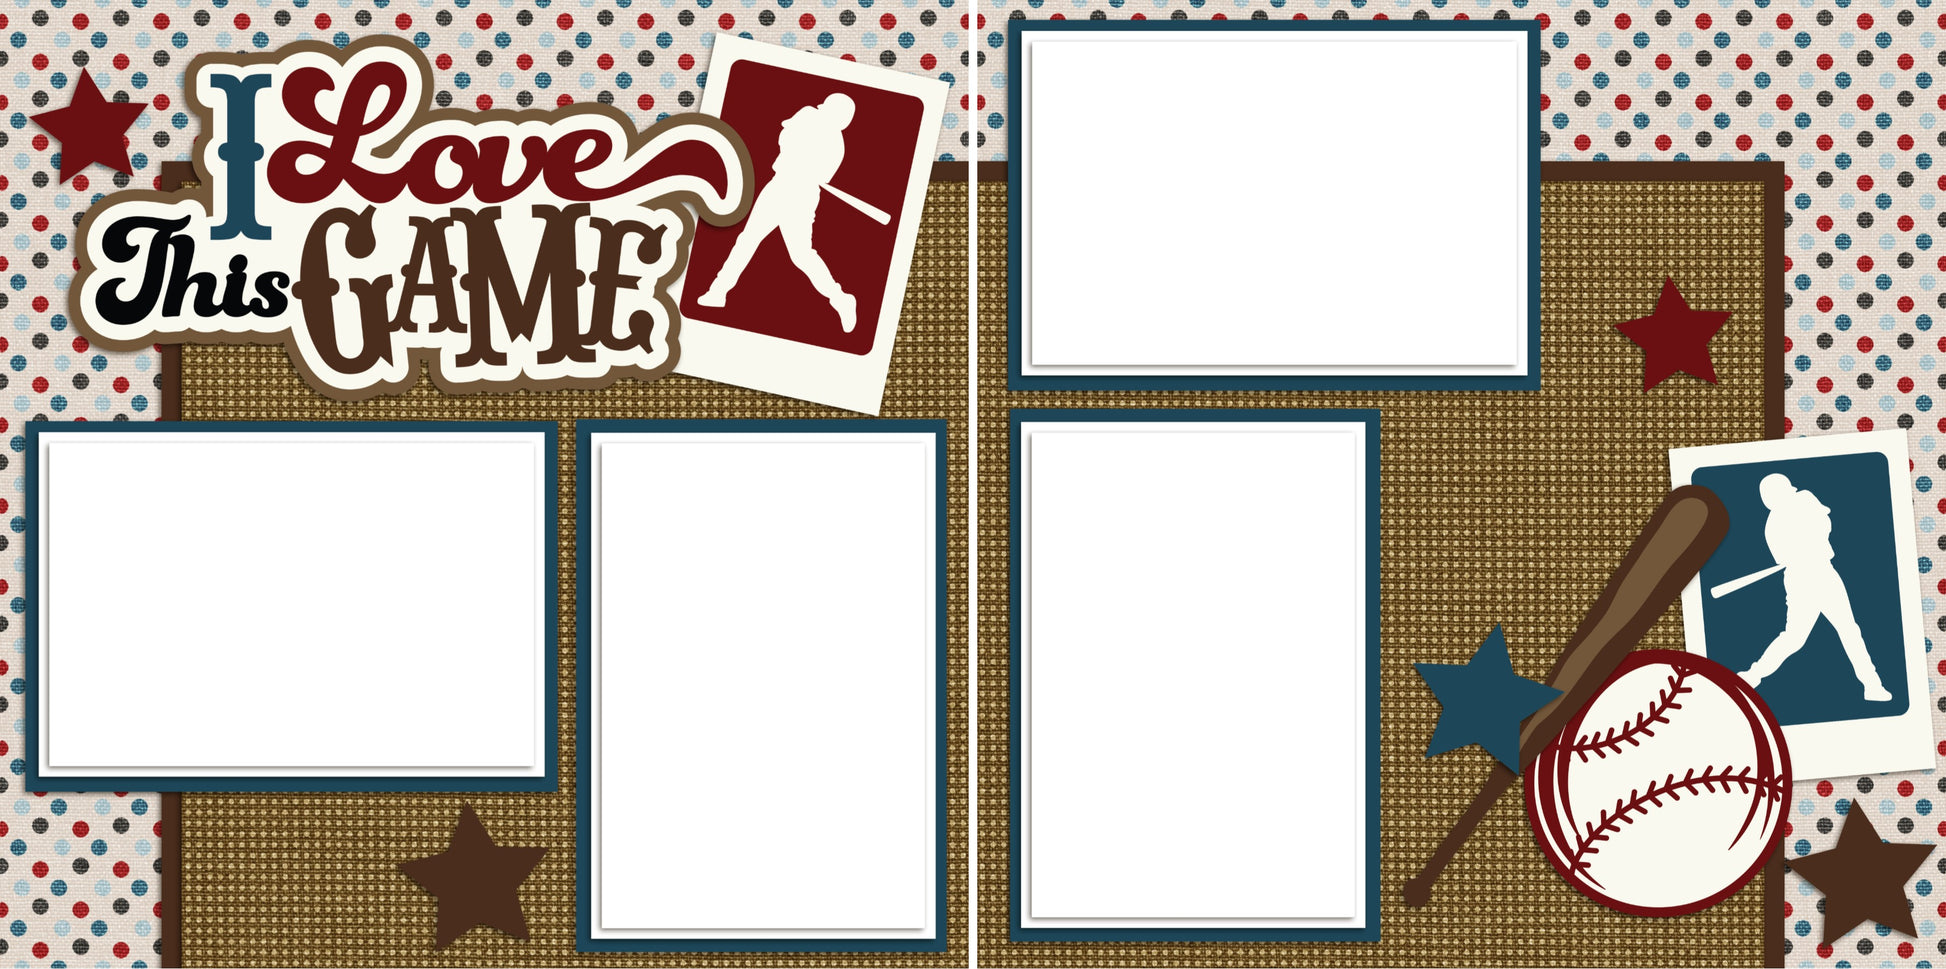 I Love This Game - Digital Scrapbook Pages - INSTANT DOWNLOAD - EZscrapbooks Scrapbook Layouts Sports